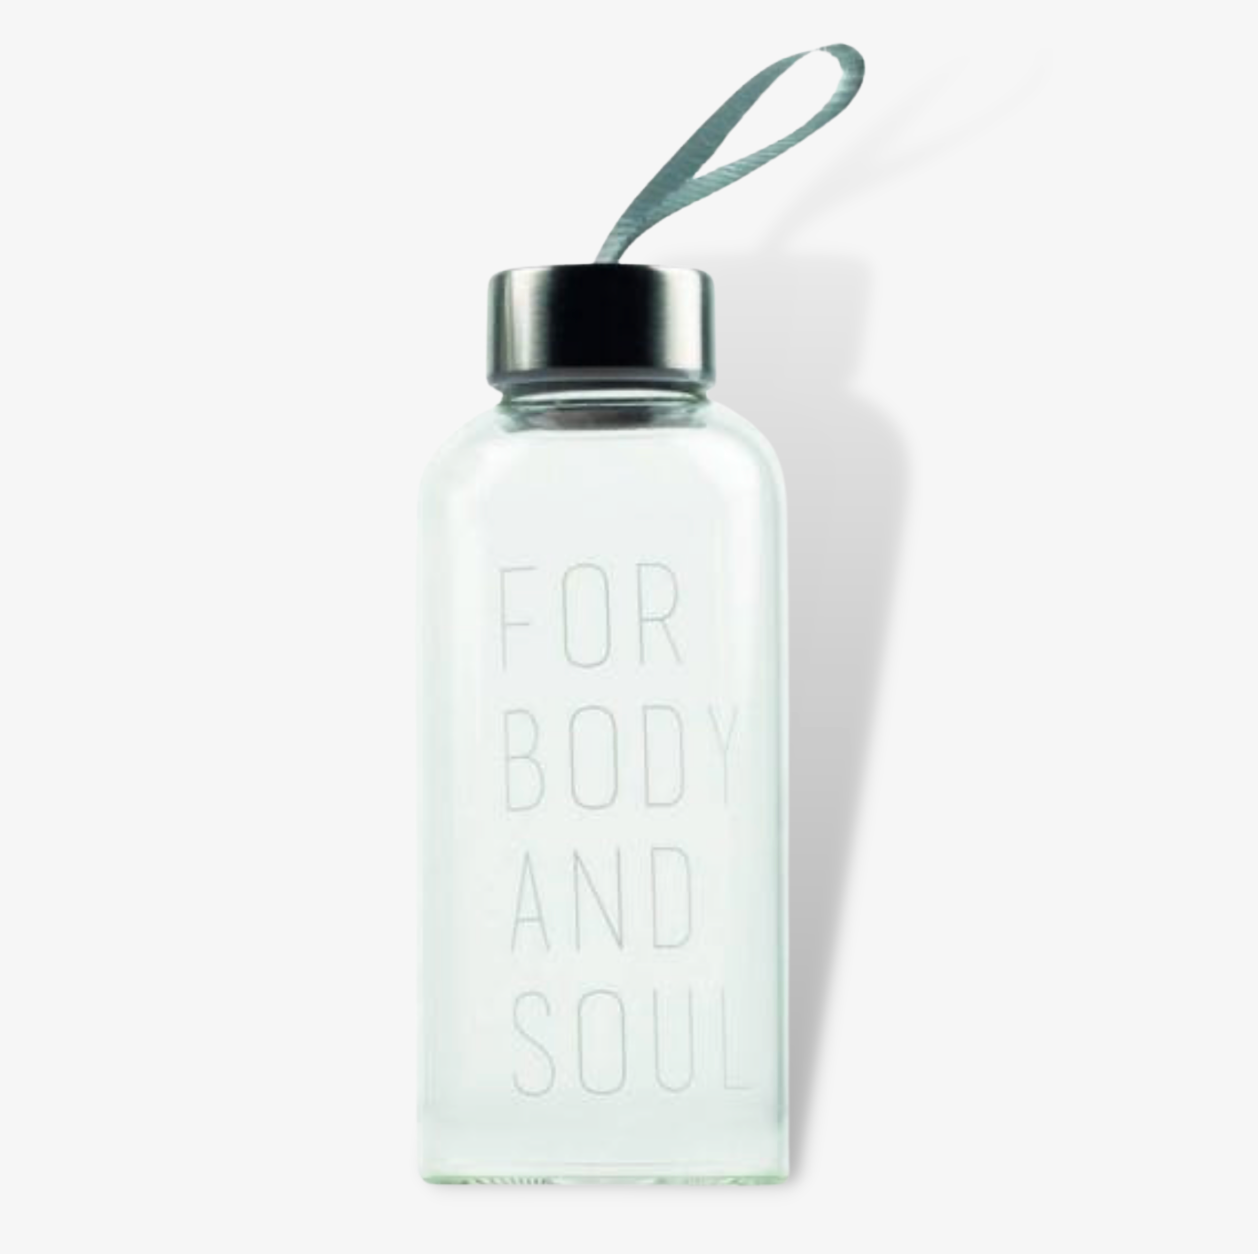 Glass Travel Bottle For Body And Soul